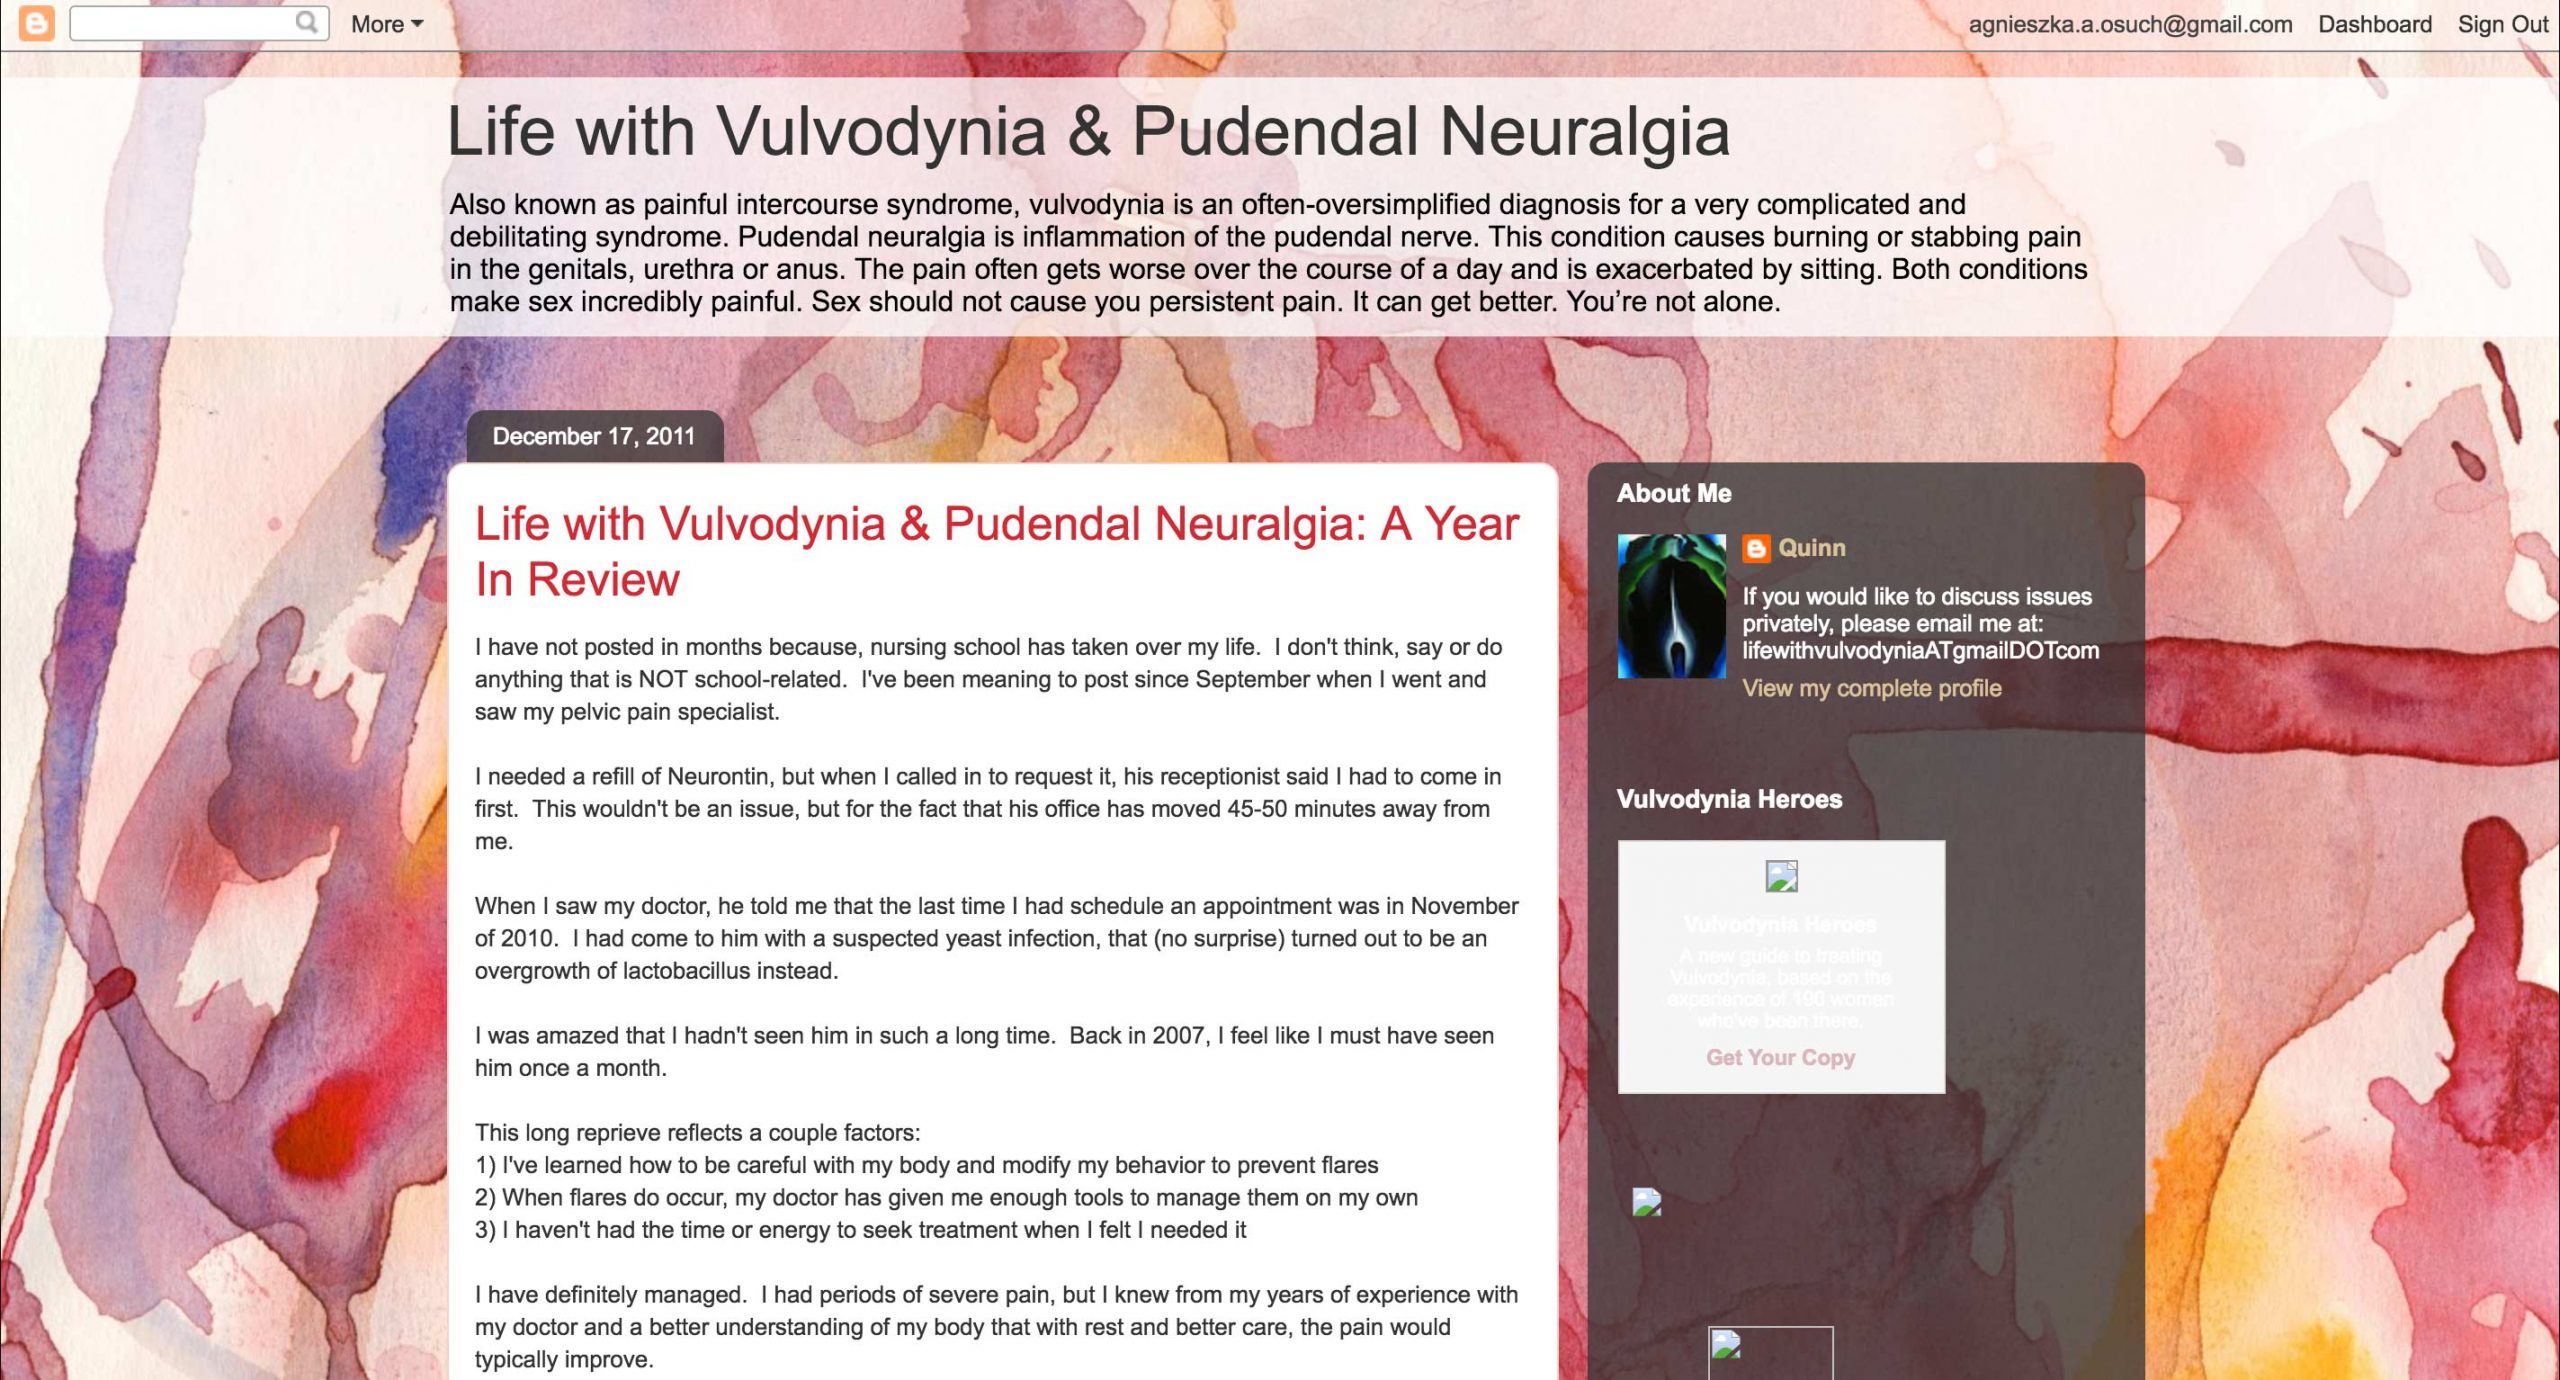 Blog about life with vulvodynia and pudendal neuralgia